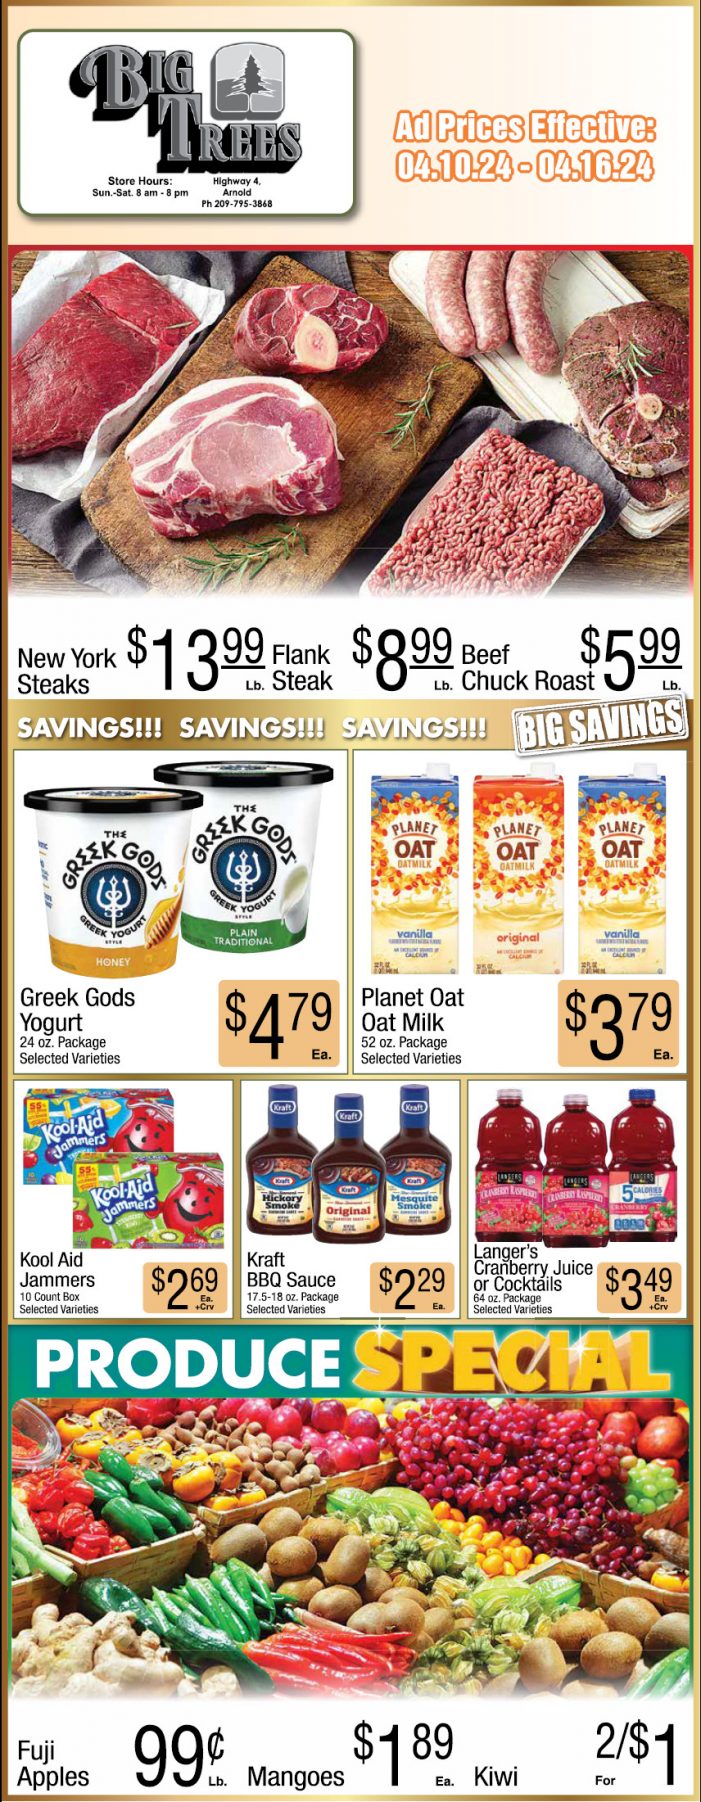 Big Trees Market Weekly Ad, Grocery, Produce, Meat & Deli Specials Through April 16th! Shop Local & Save!